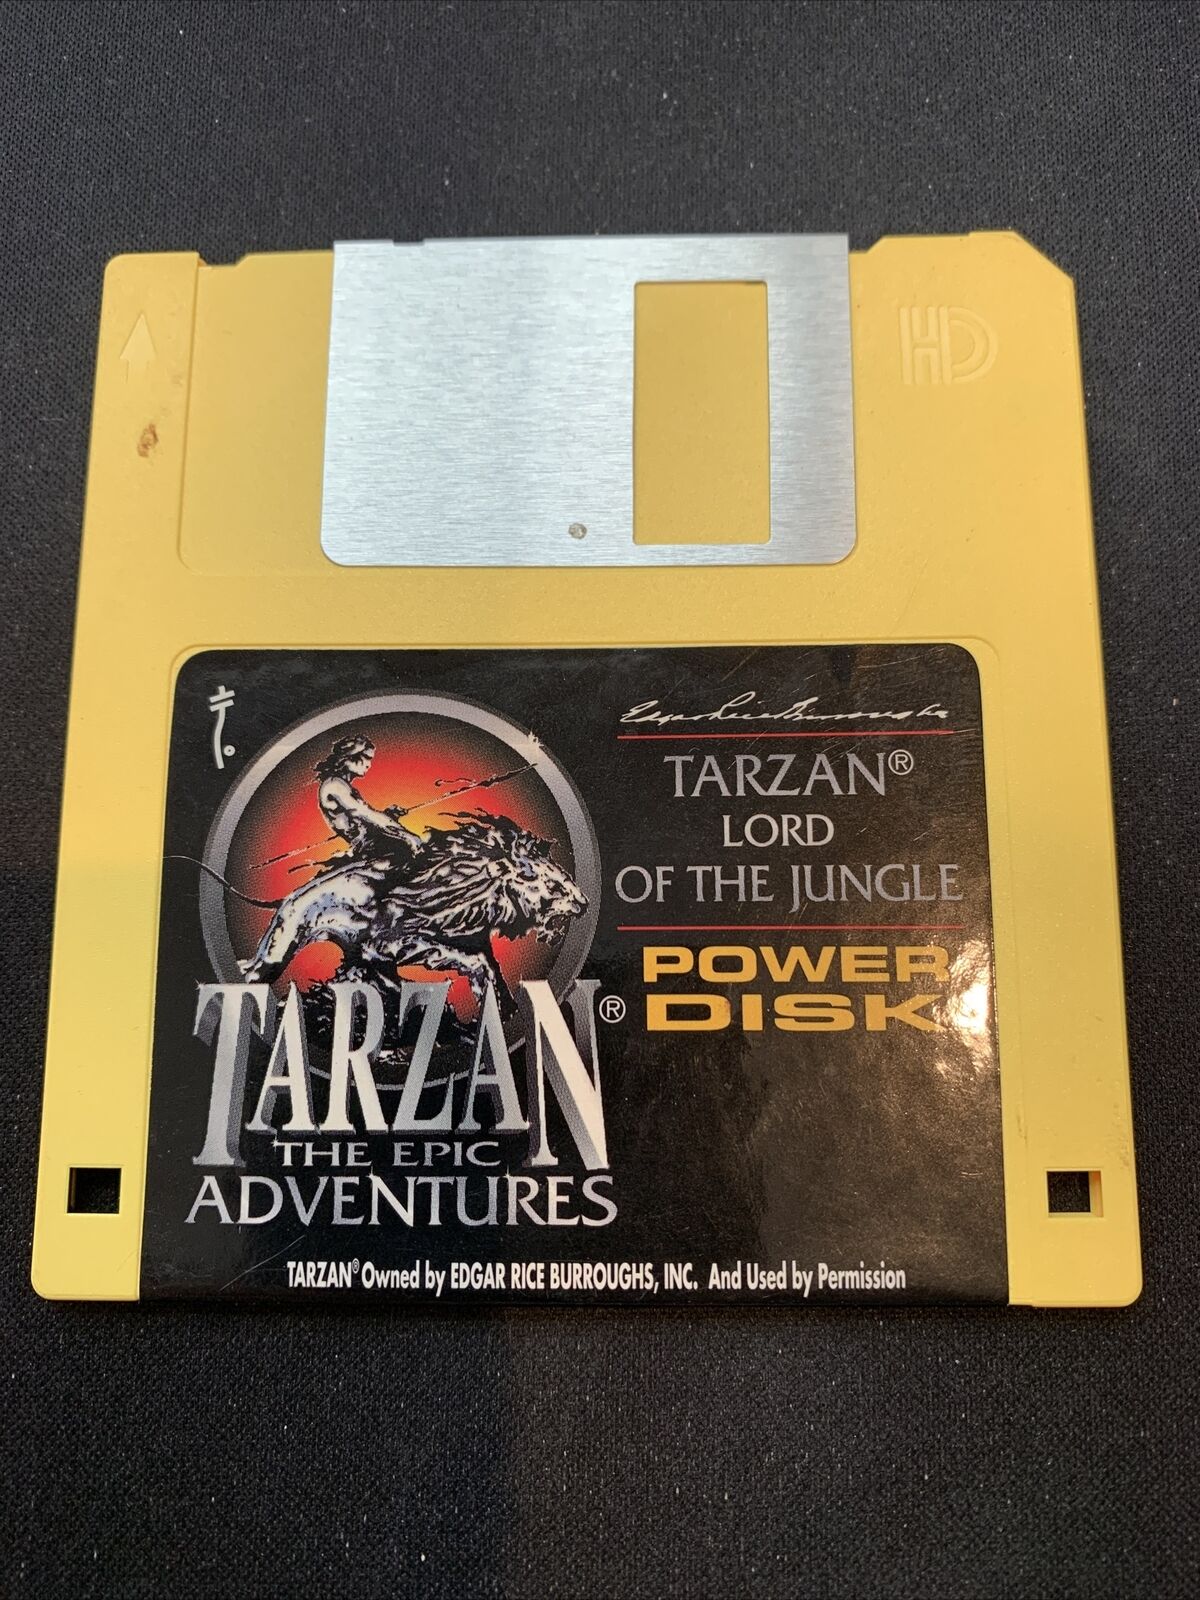 1995 TARZAN LORD OF THE JUNGLE Vintage PC Game 3.5 Floppy Disk